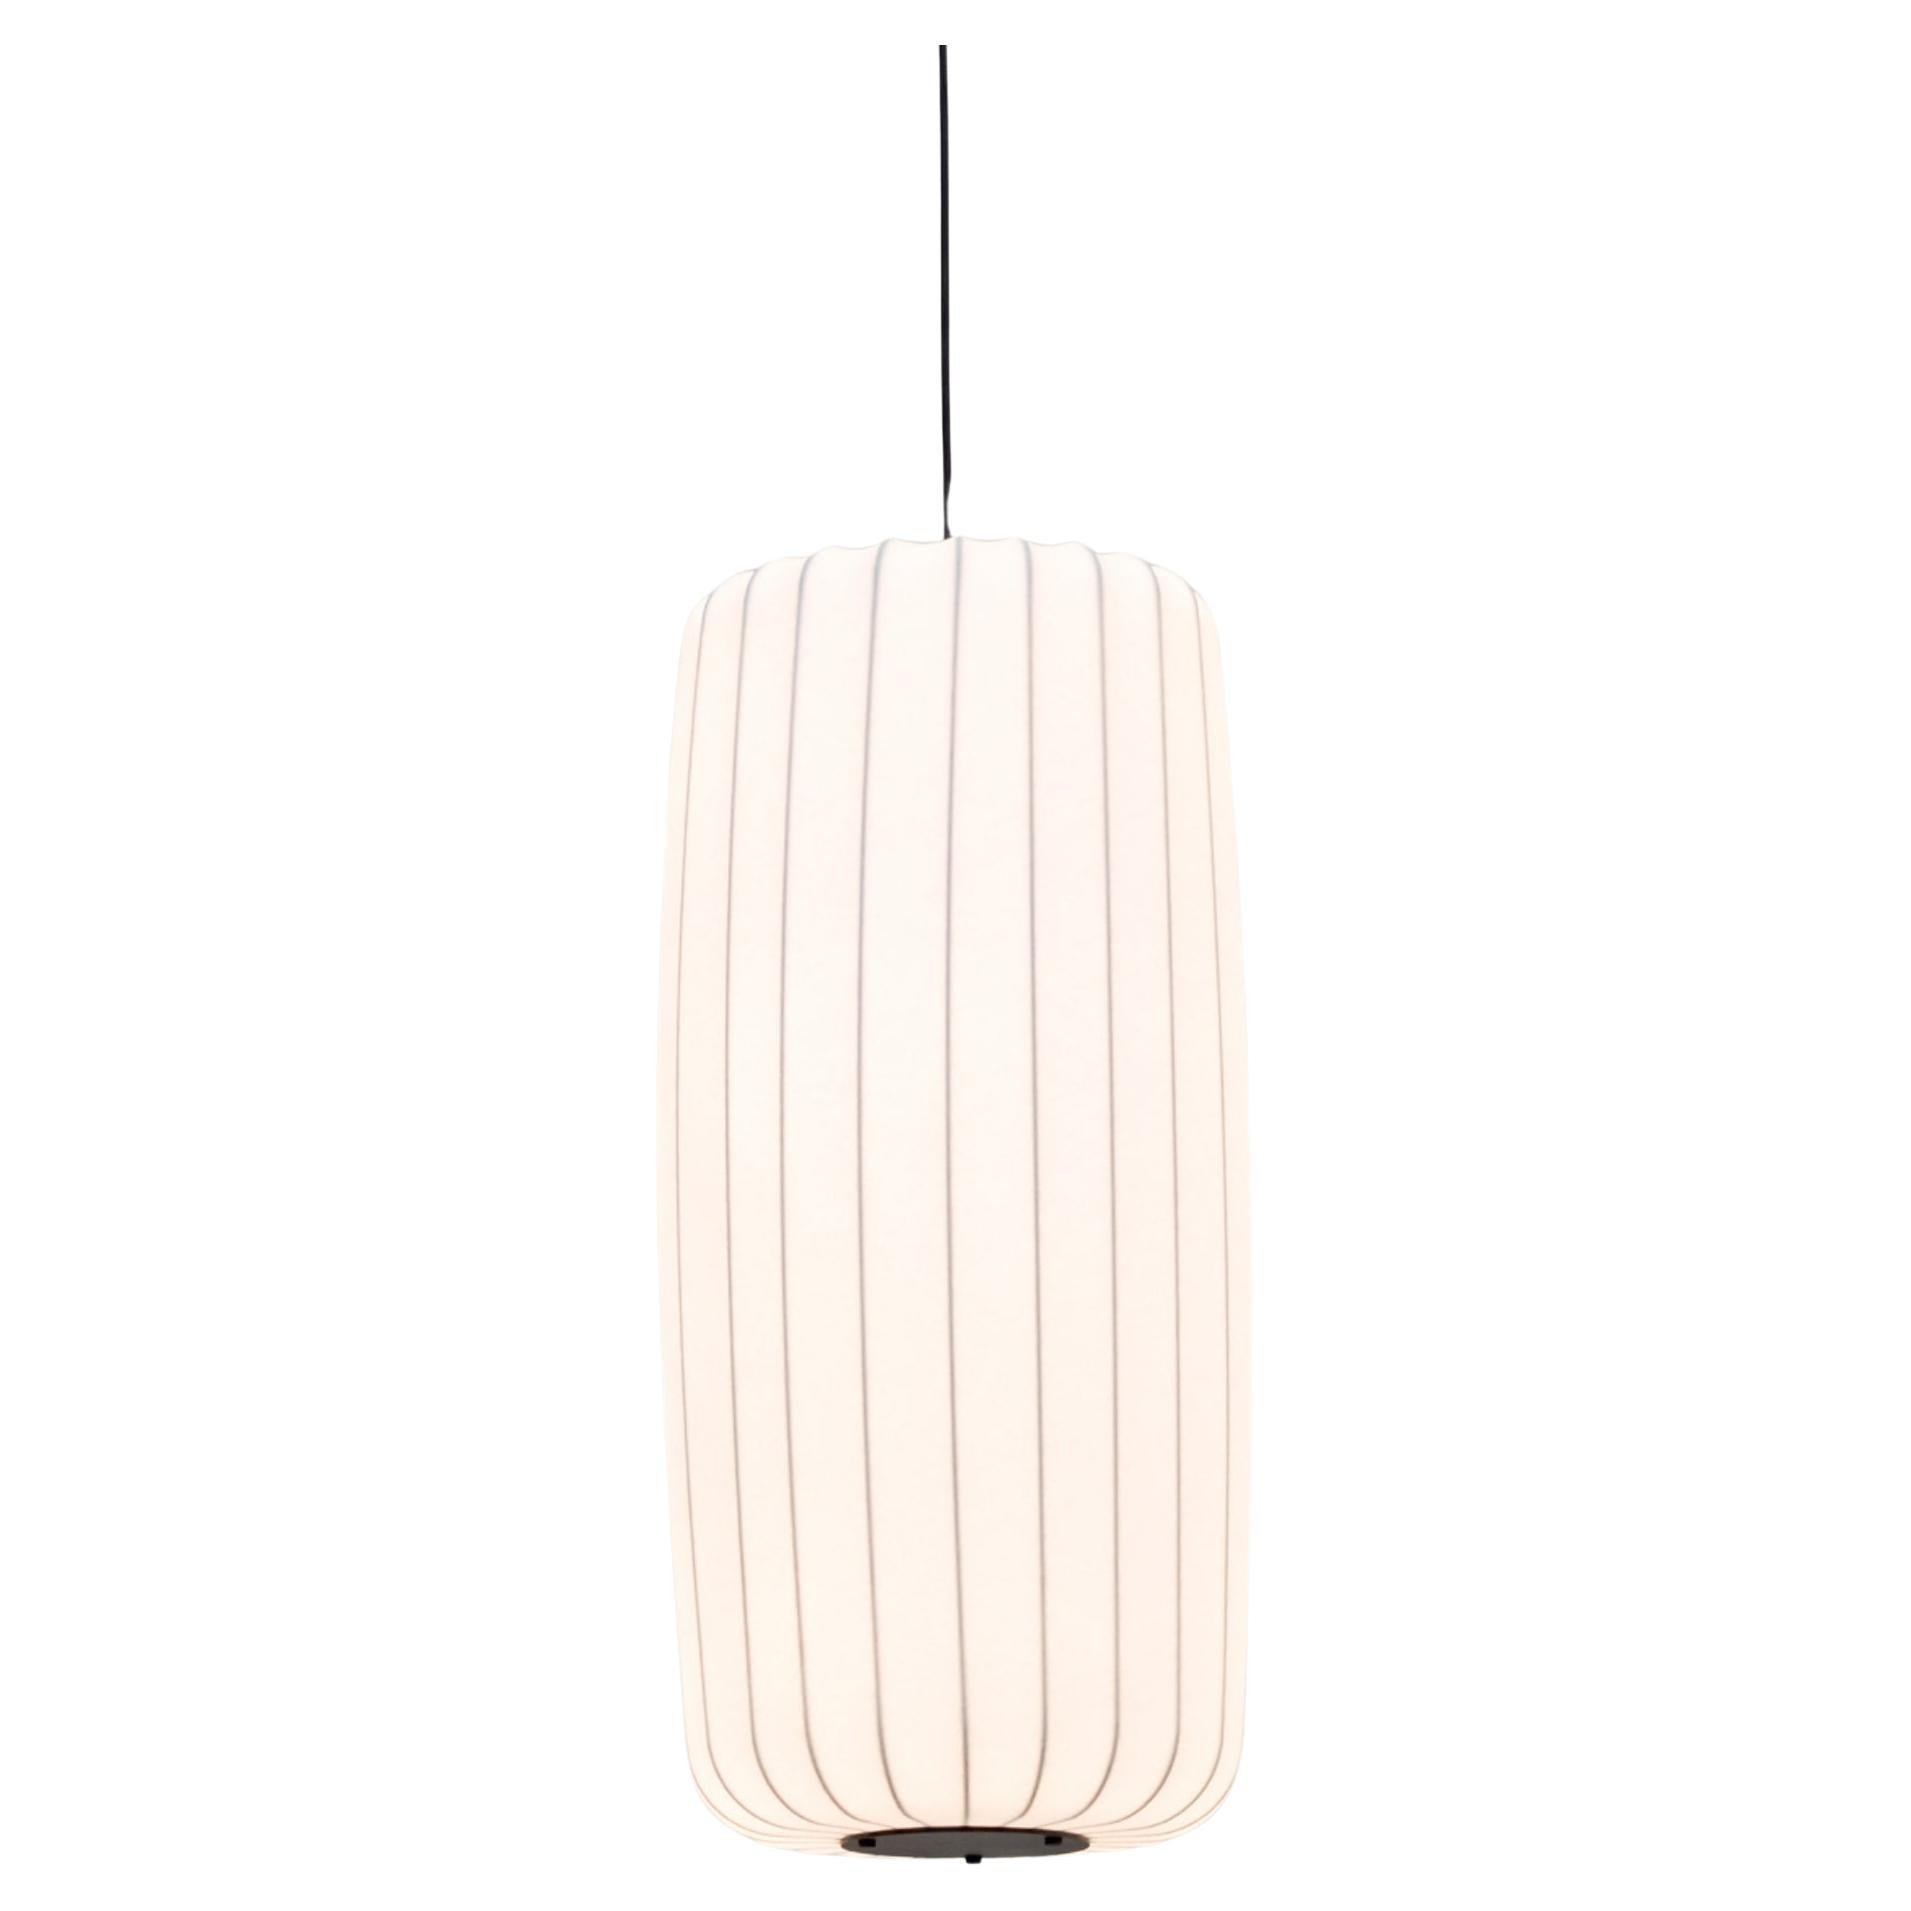 Cocoon Polymer "To" Pendant Lamp by Aqua Creations For Sale